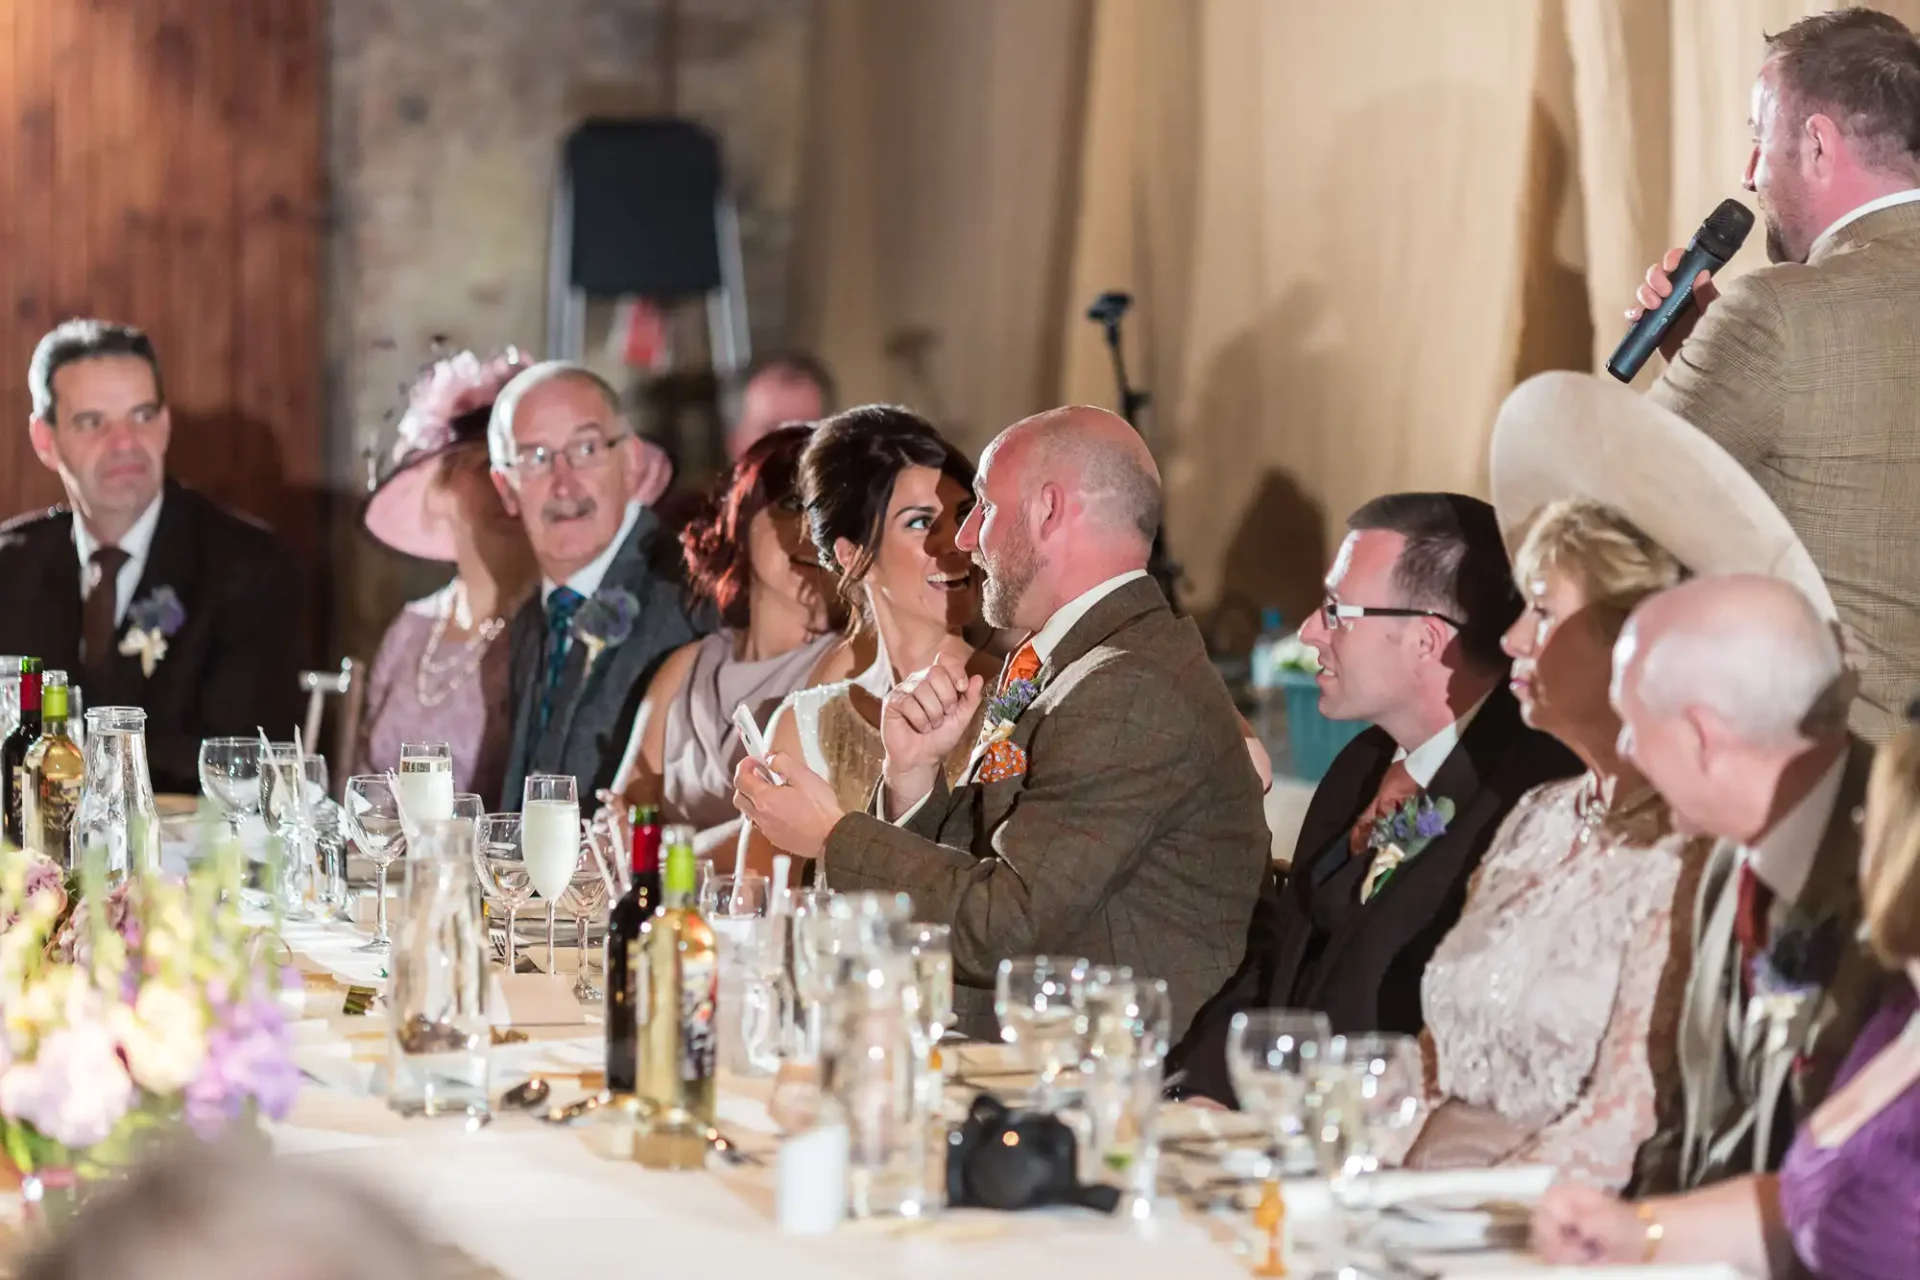 A wedding reception scene with a bride and groom seated at a long table, conversing and smiling, while a man standing delivers a speech with a microphone.